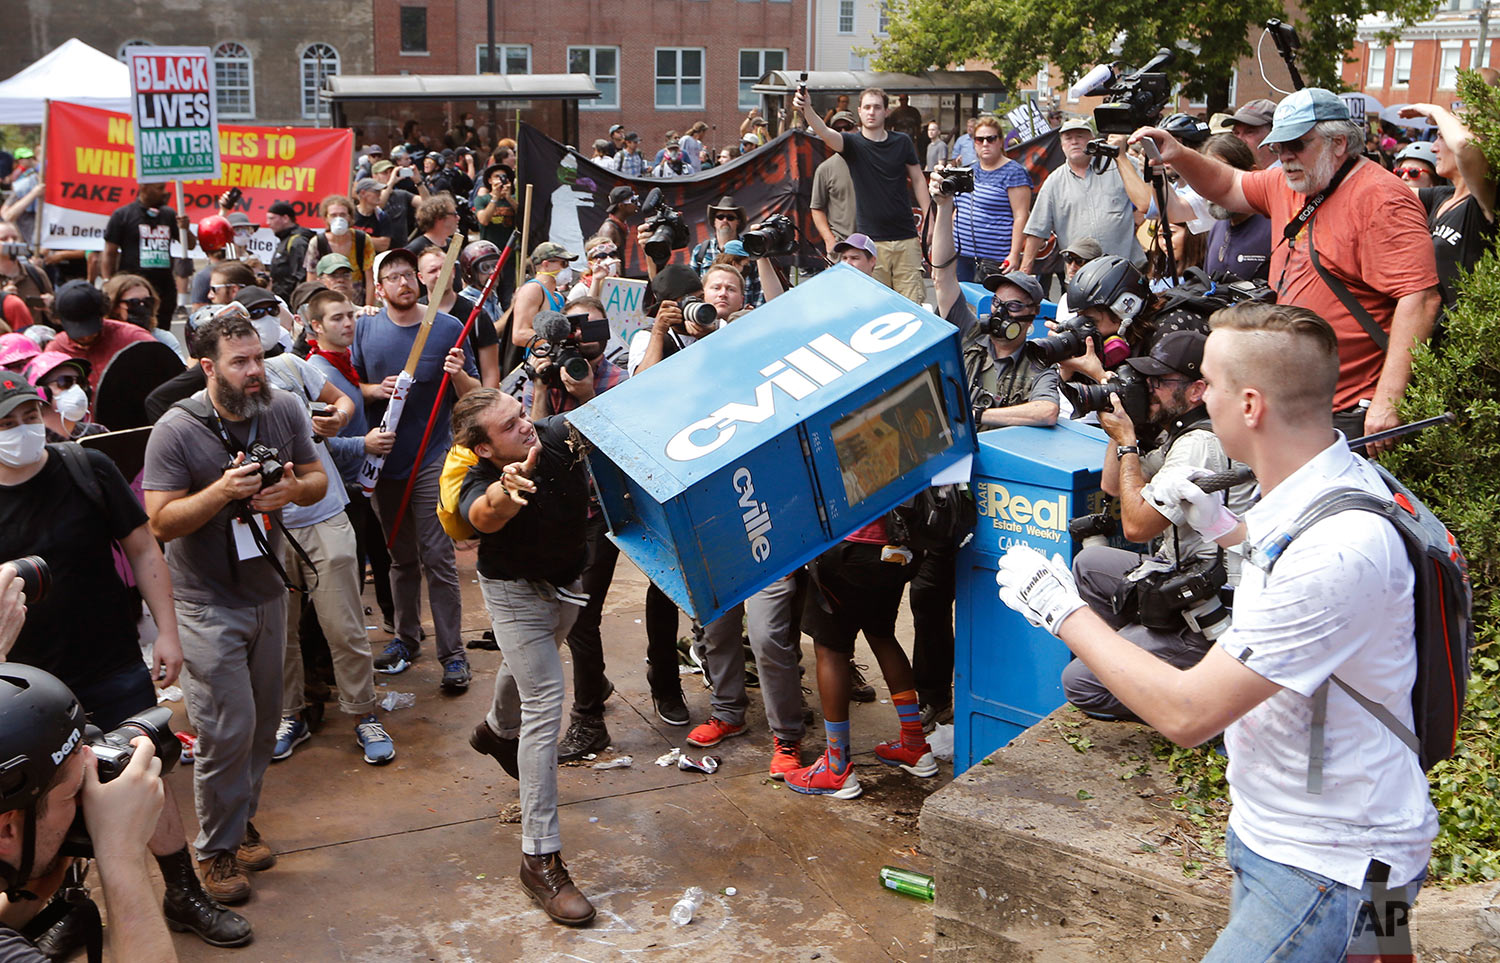  White nationalist demonstrators clash with a counter demonstrator  as he throws a newspaper box at the entrance to Lee Park in Charlottesville, Va., Saturday, Aug. 12, 2017. Gov. Terry McAuliffe declared a state of emergency and police dressed in ri